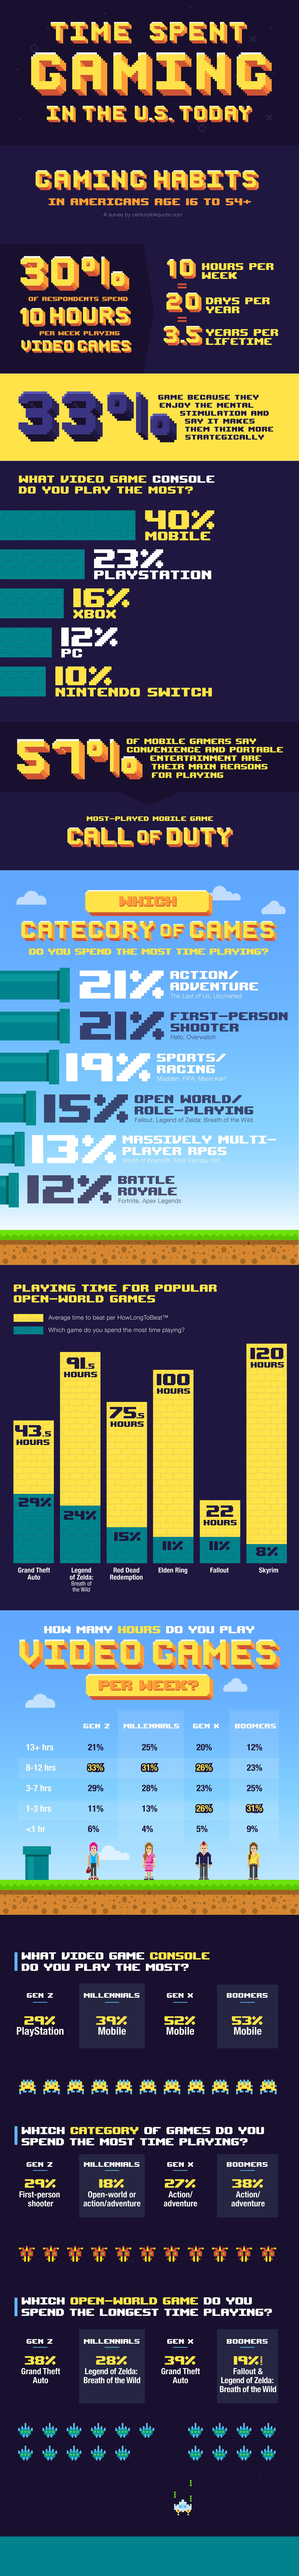 How Long Should a 10-year-old Play Video Games Per Day?